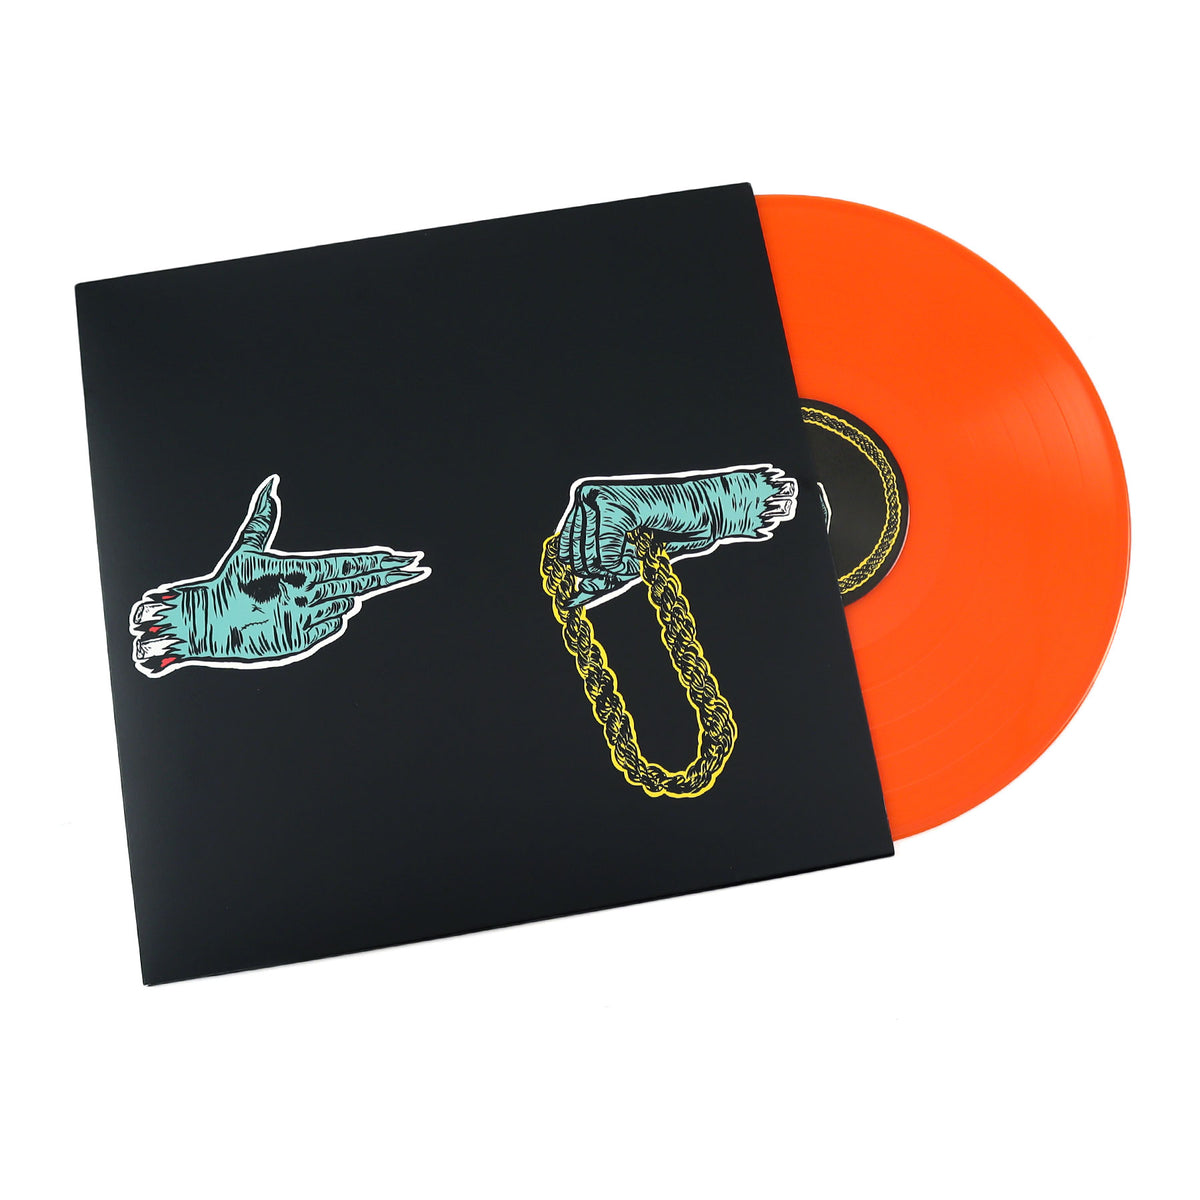 Run The Jewels: Run The Jewels (Indie Exclusive Orange Colored 